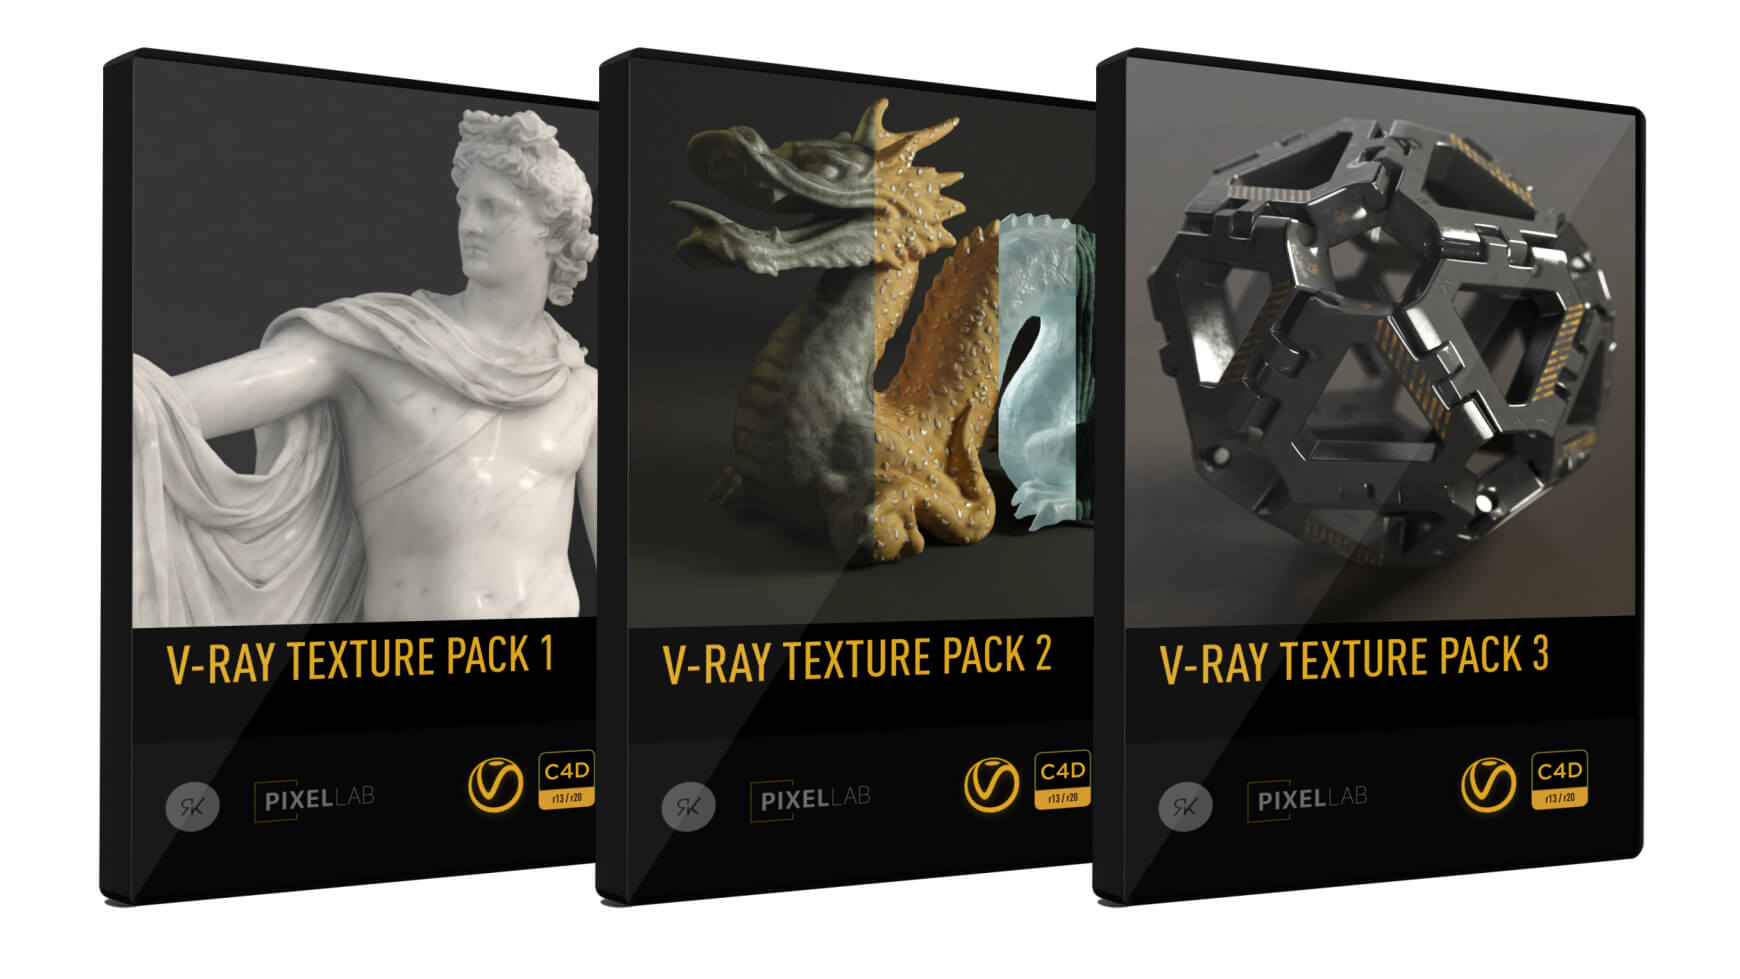 The Pixel Lab V-Ray Texture Pack Bundle